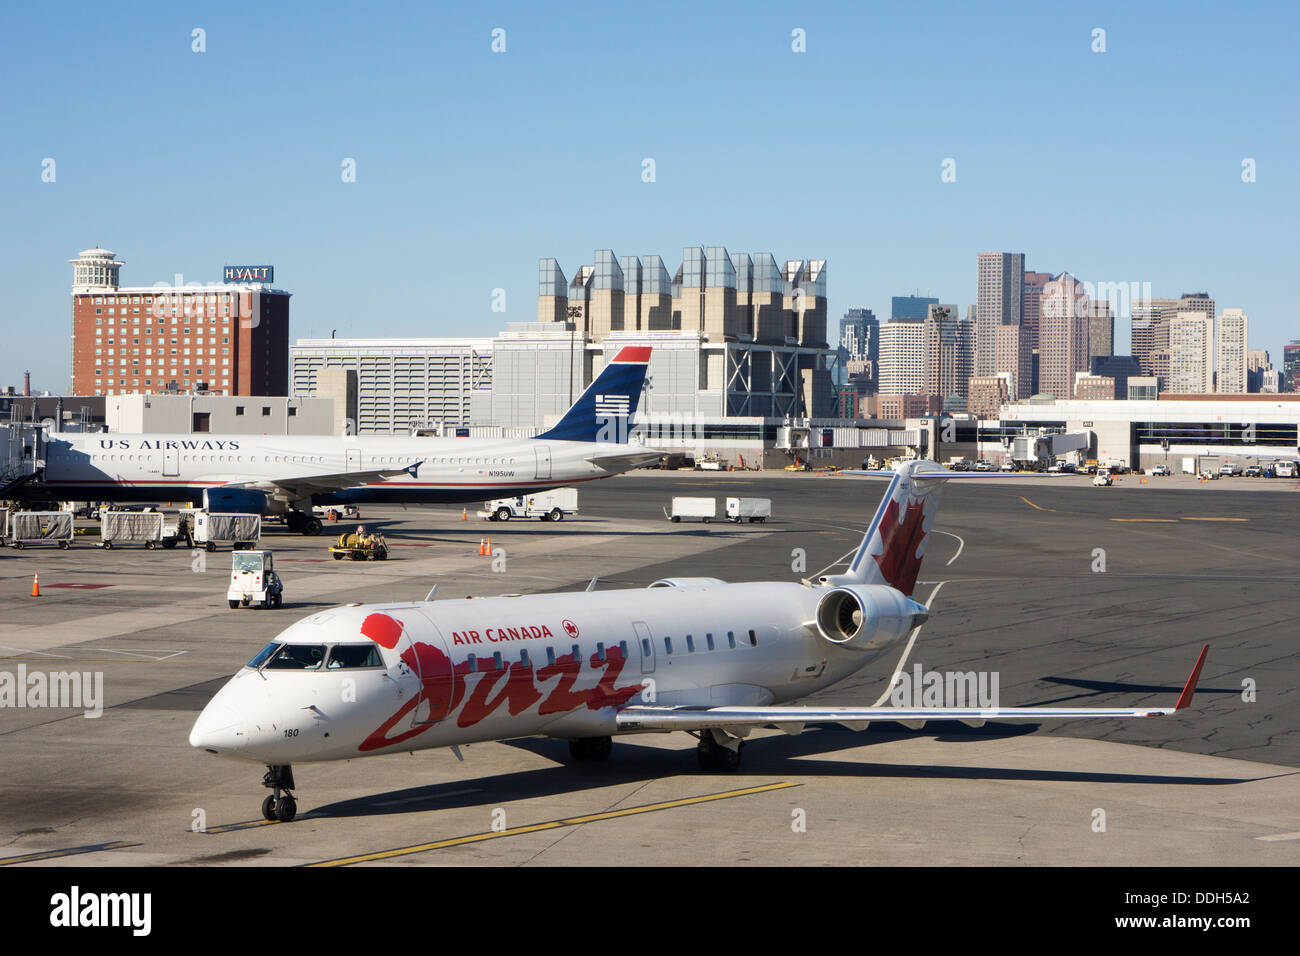 Canadian aircraft parked on apron at Logan International Airport in Boston Stock Photo